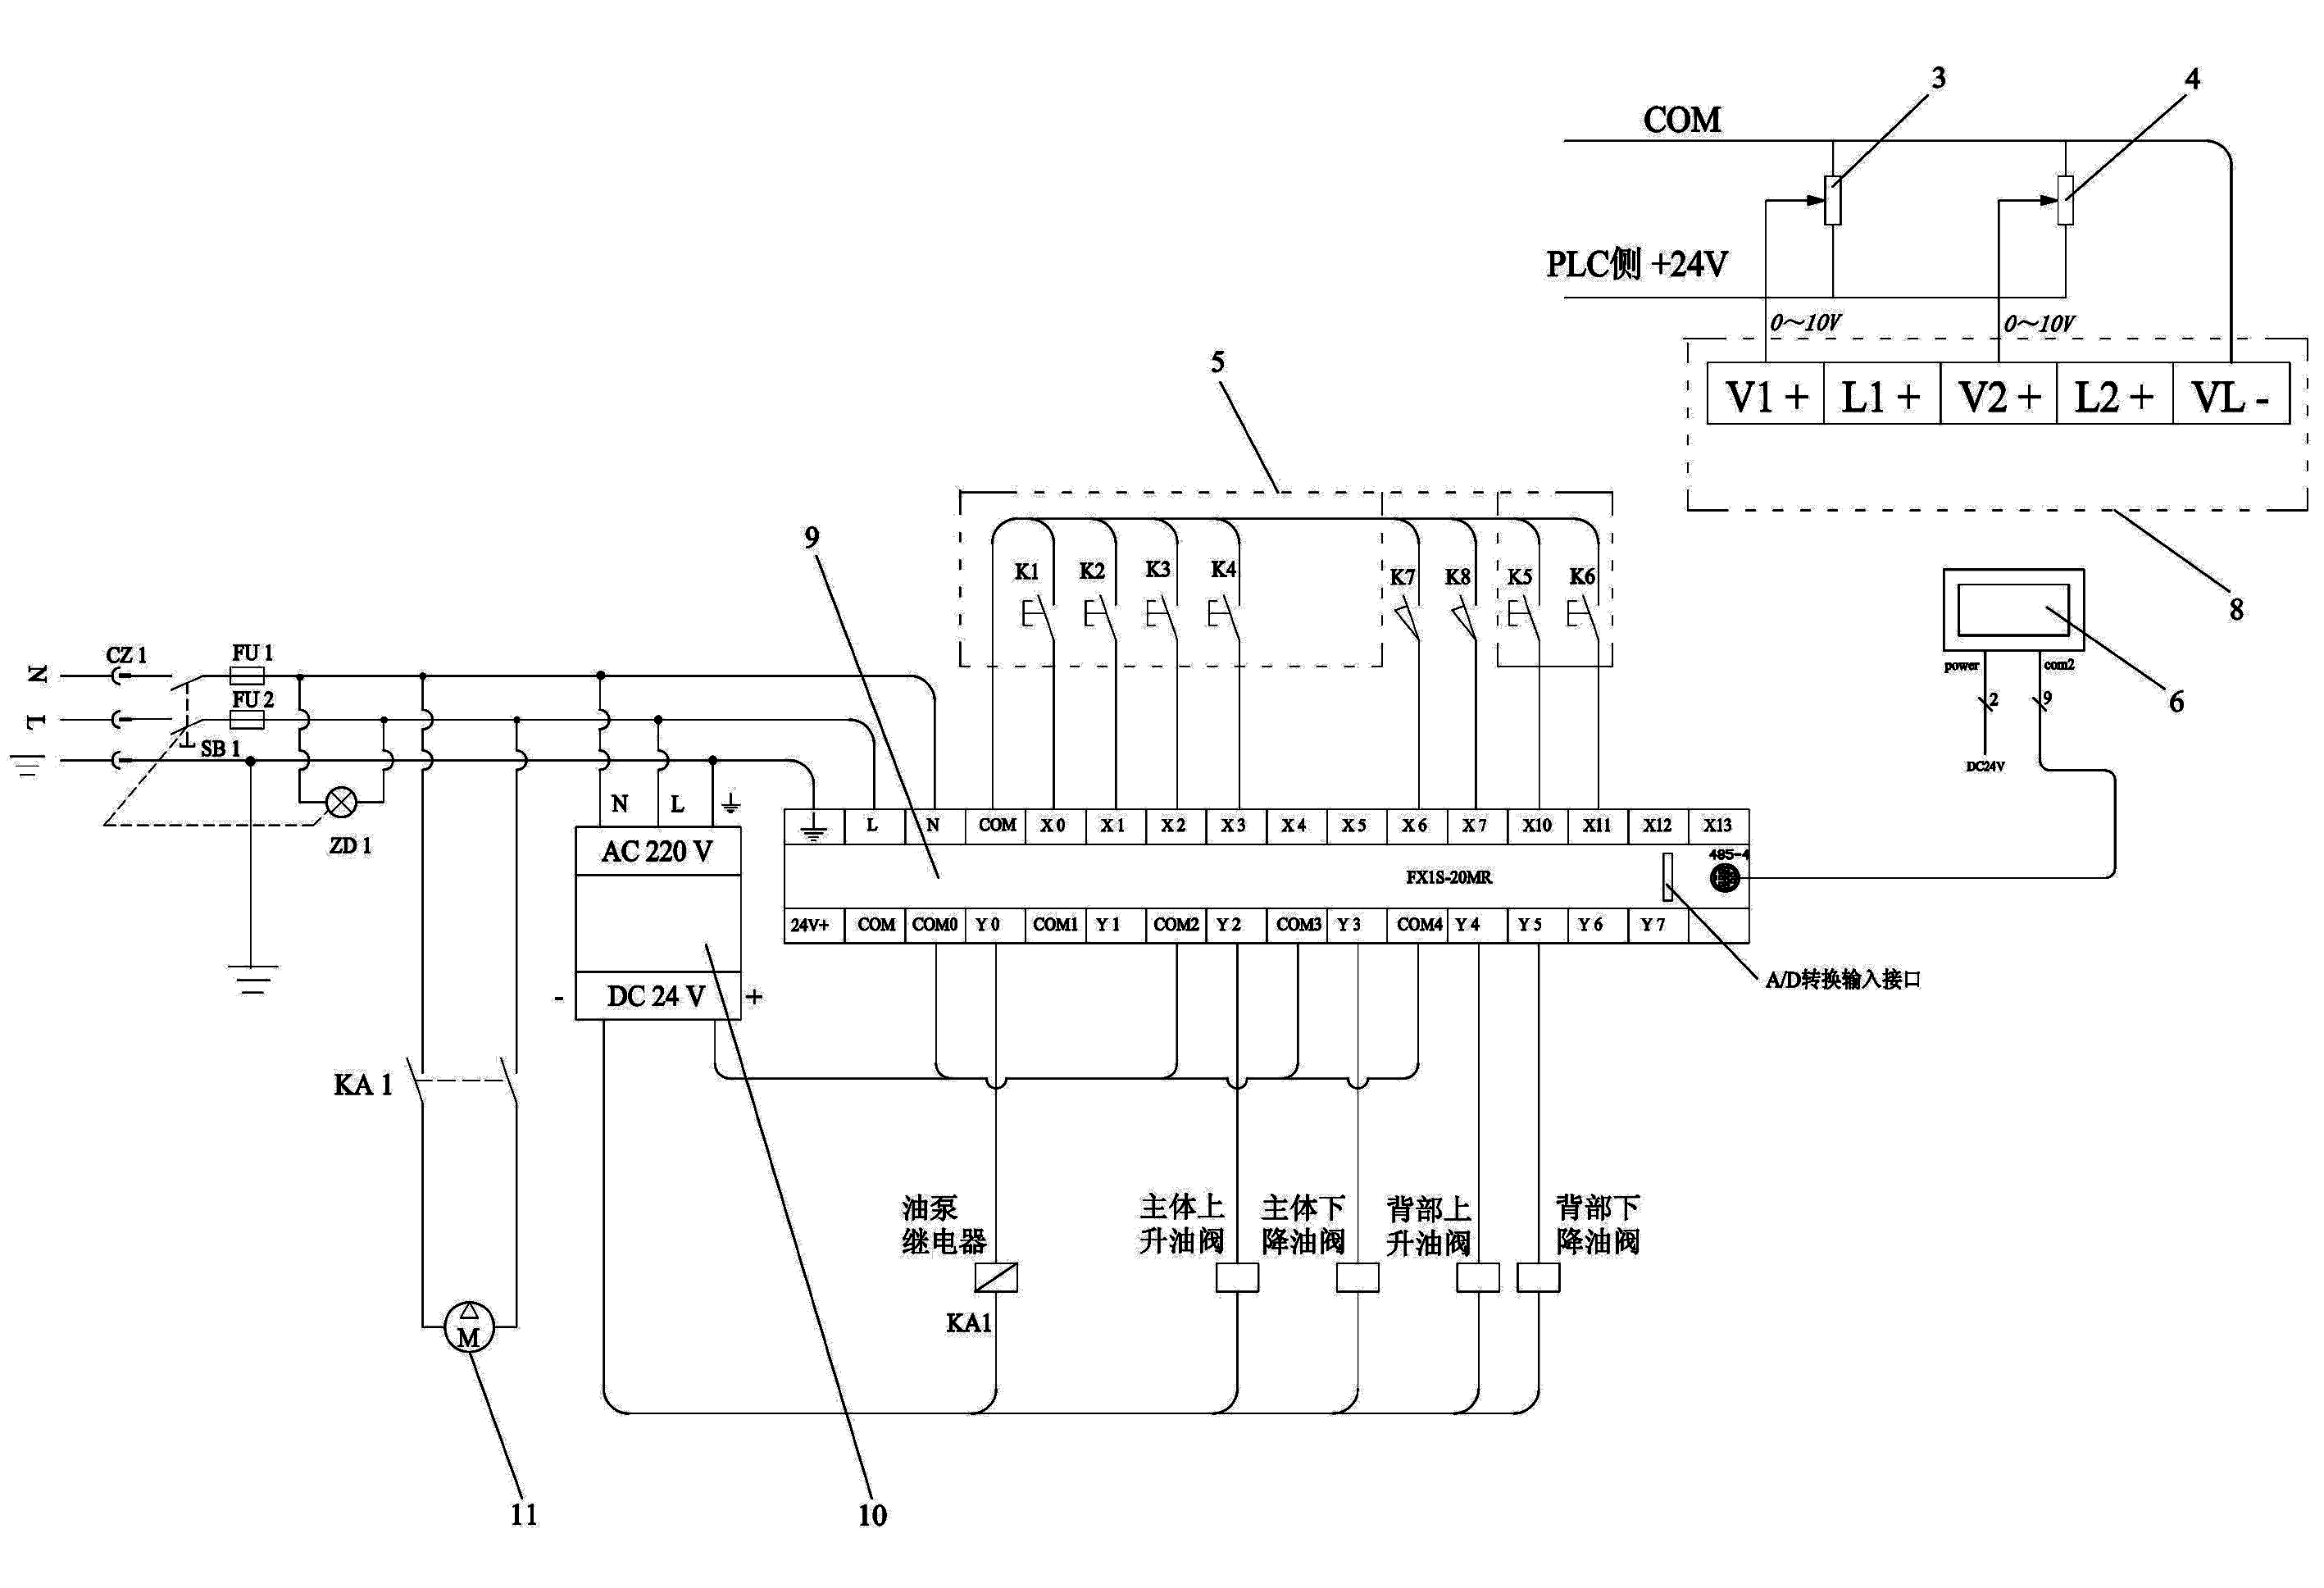 Operating table control device